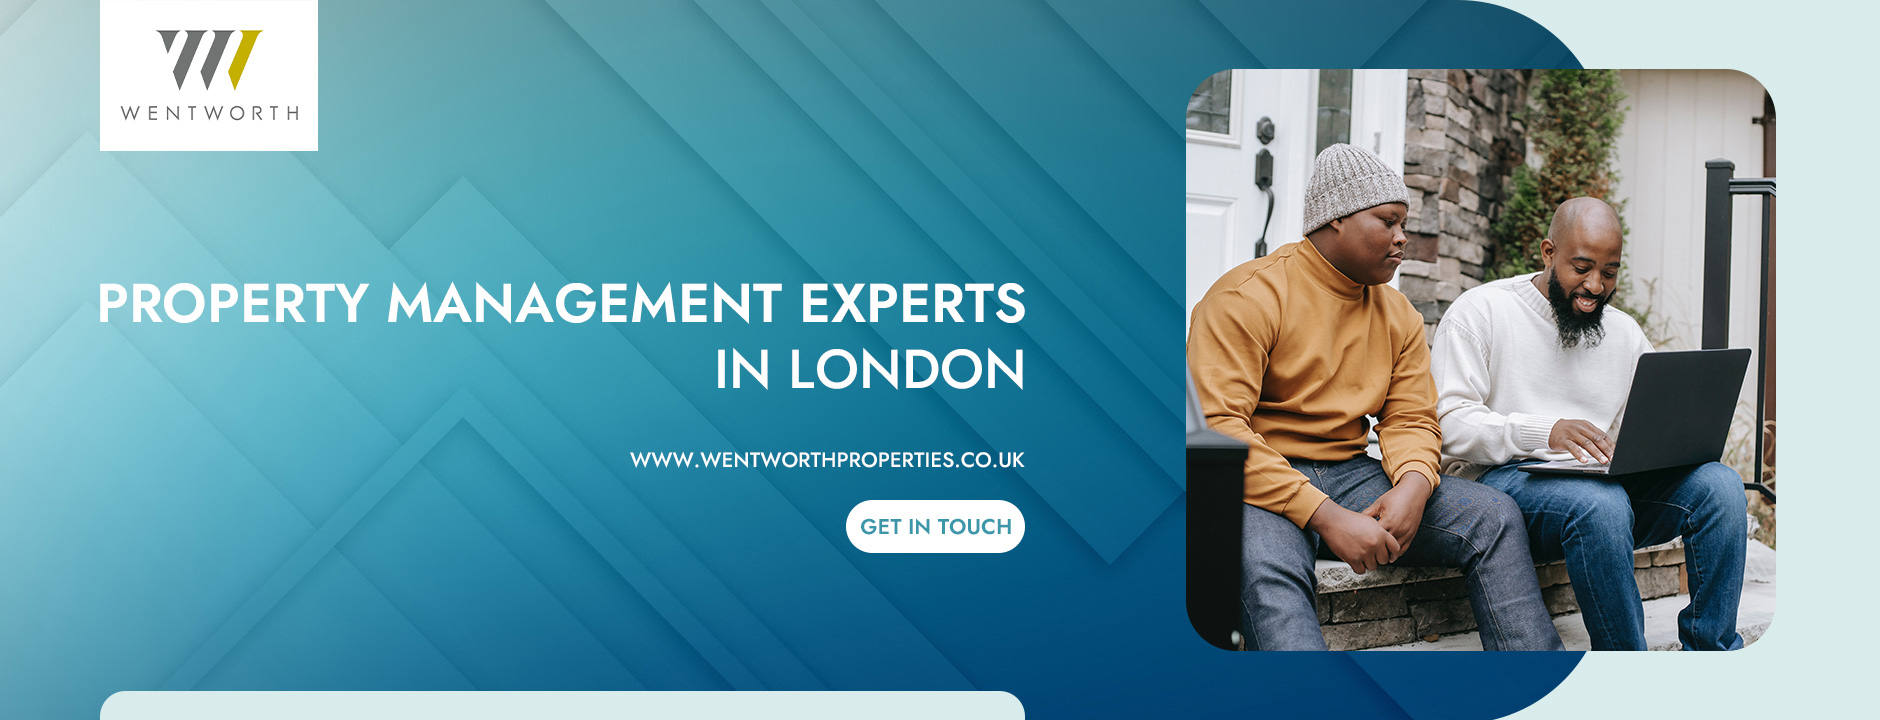 property management experts in London